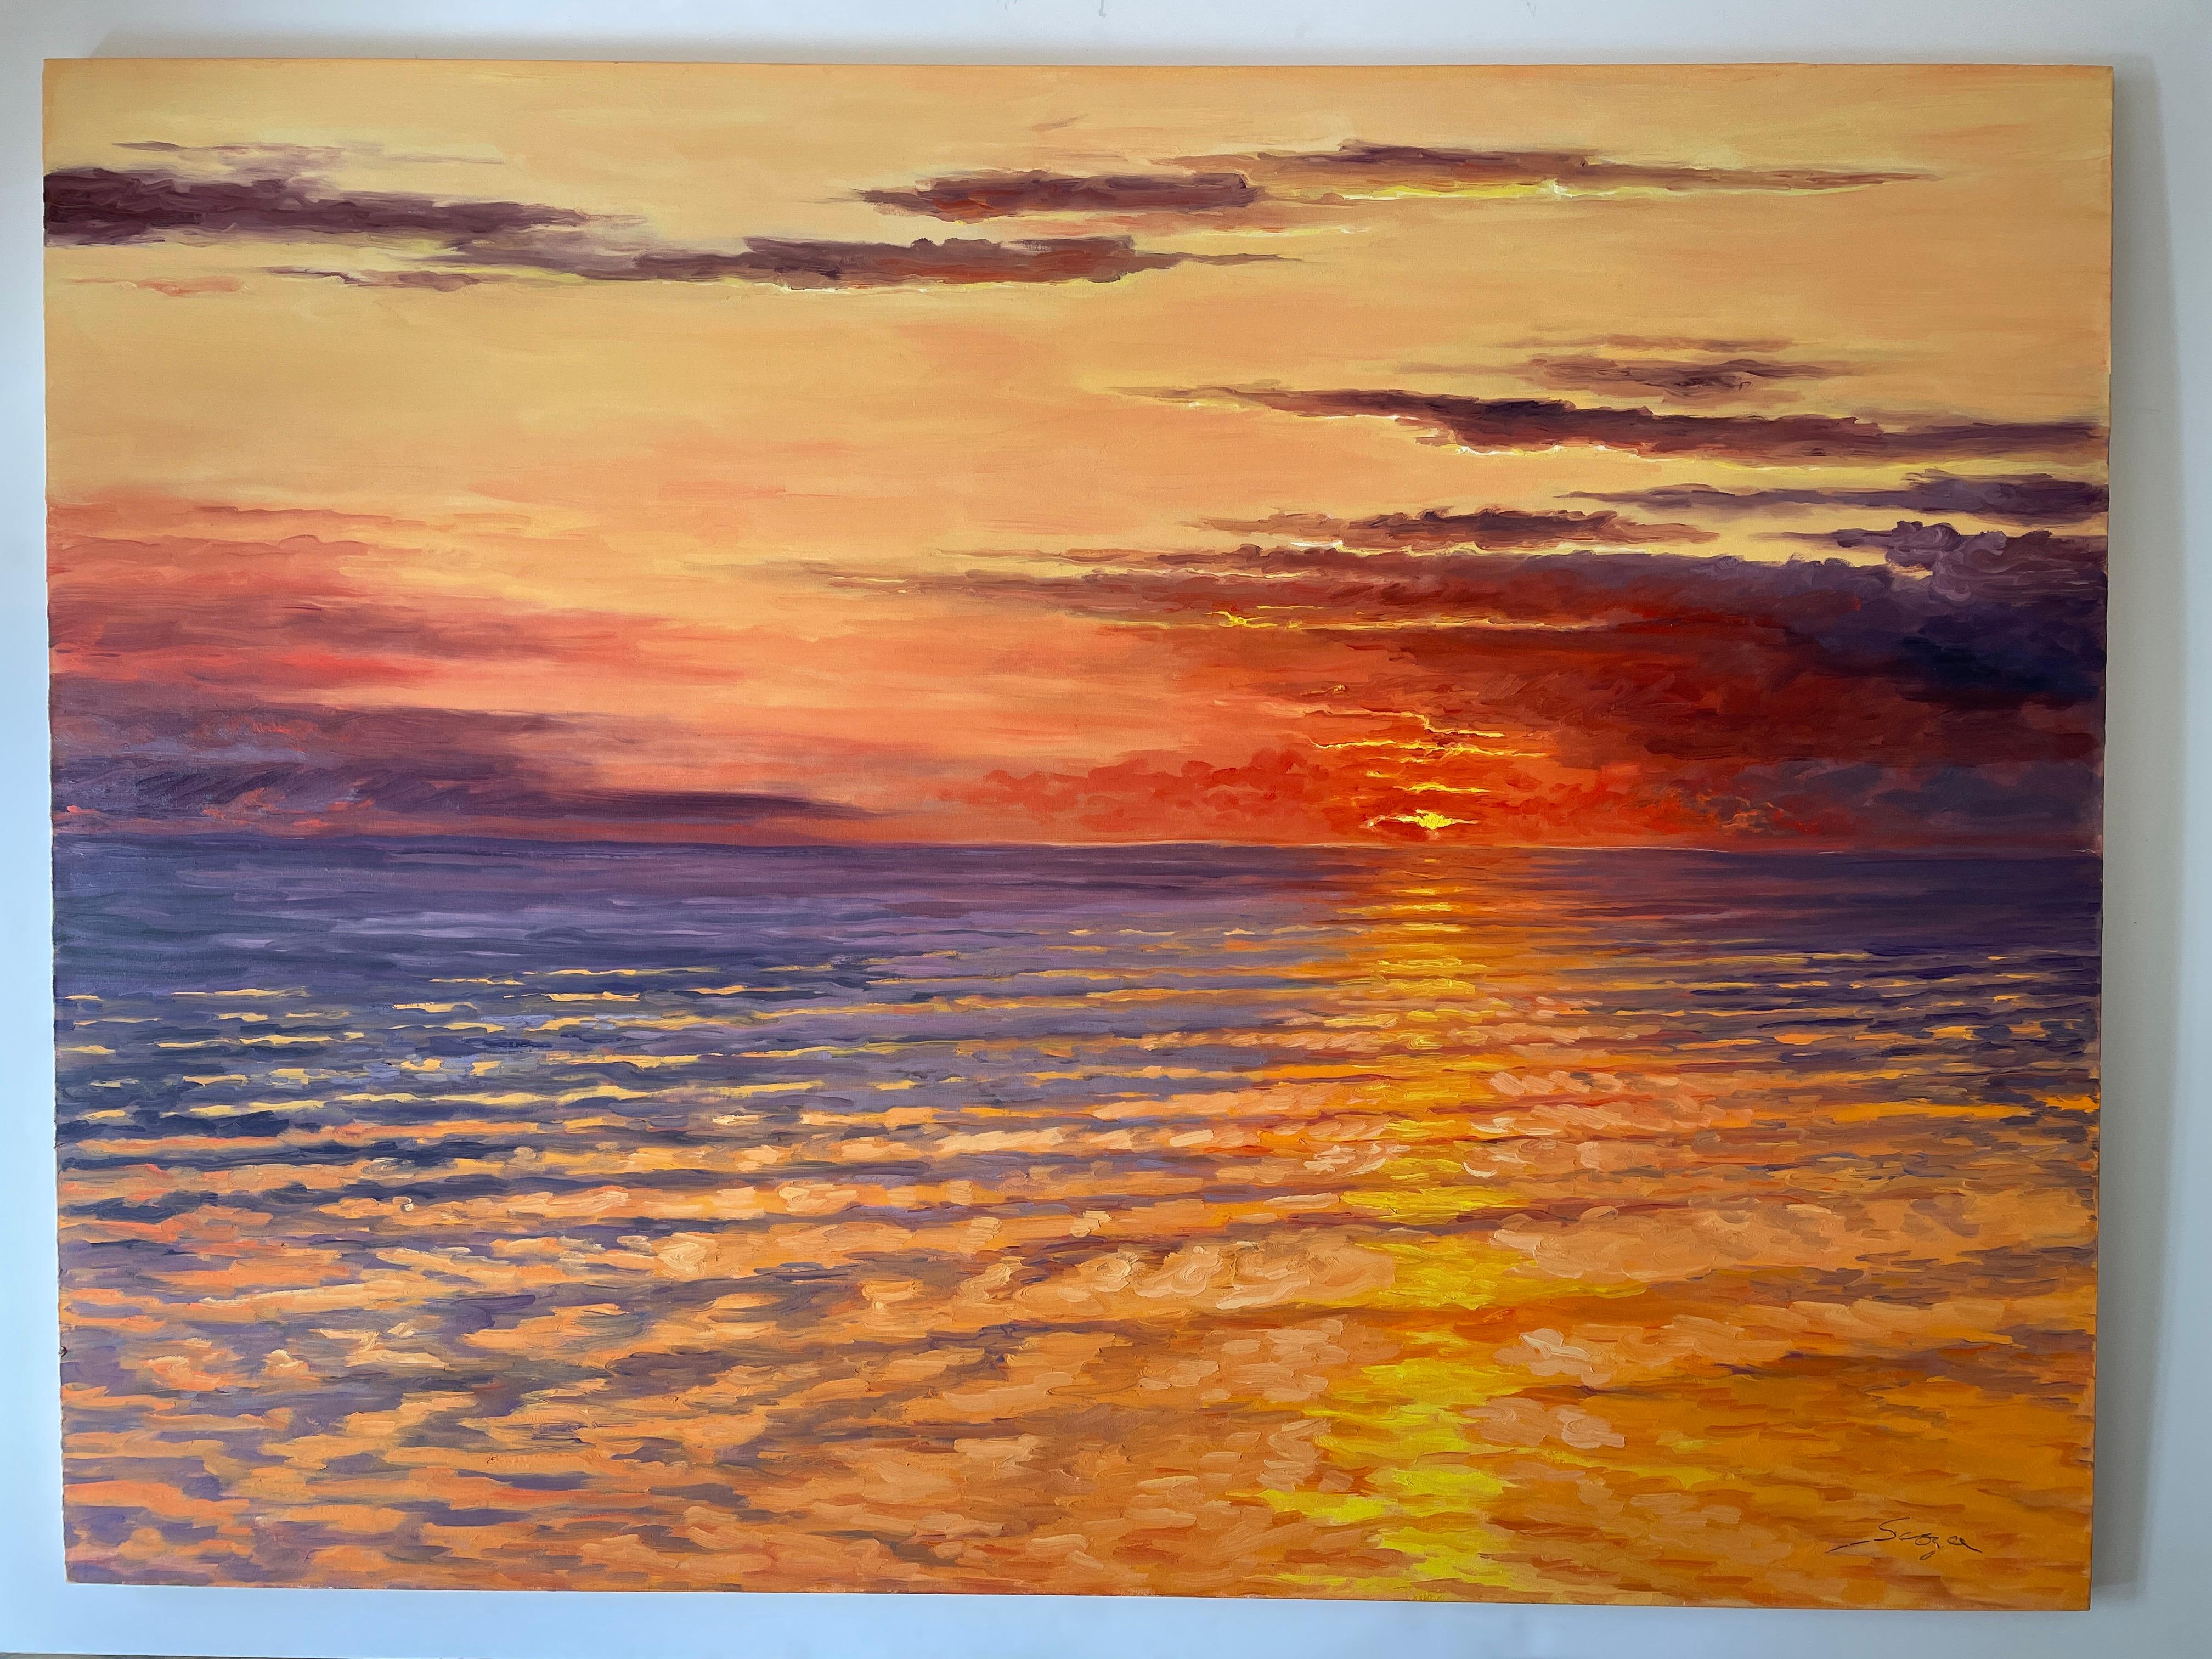 Dusk as the setting sun turns ocean and sky on fire. Title - Sunset  - Brown Landscape Painting by Carl Scorza